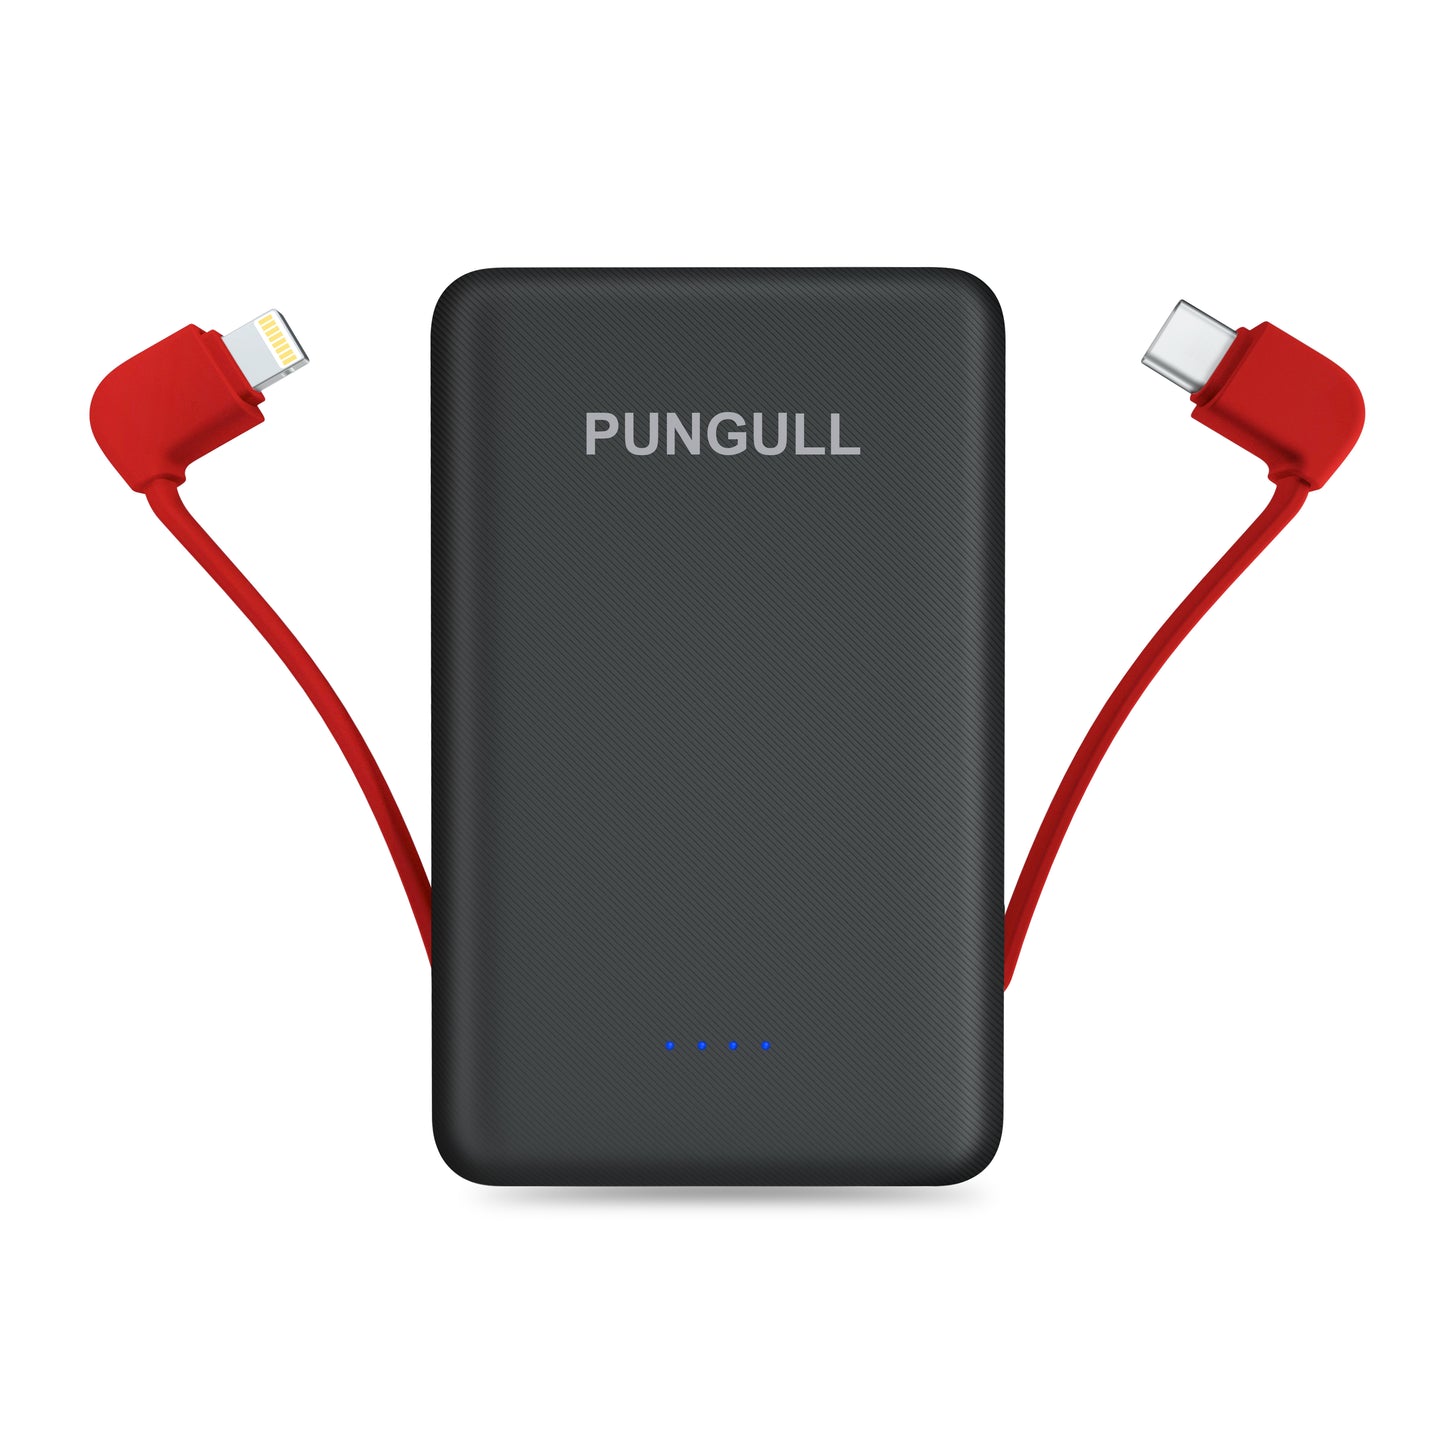  Portable Charger with Built in Cables, Portable